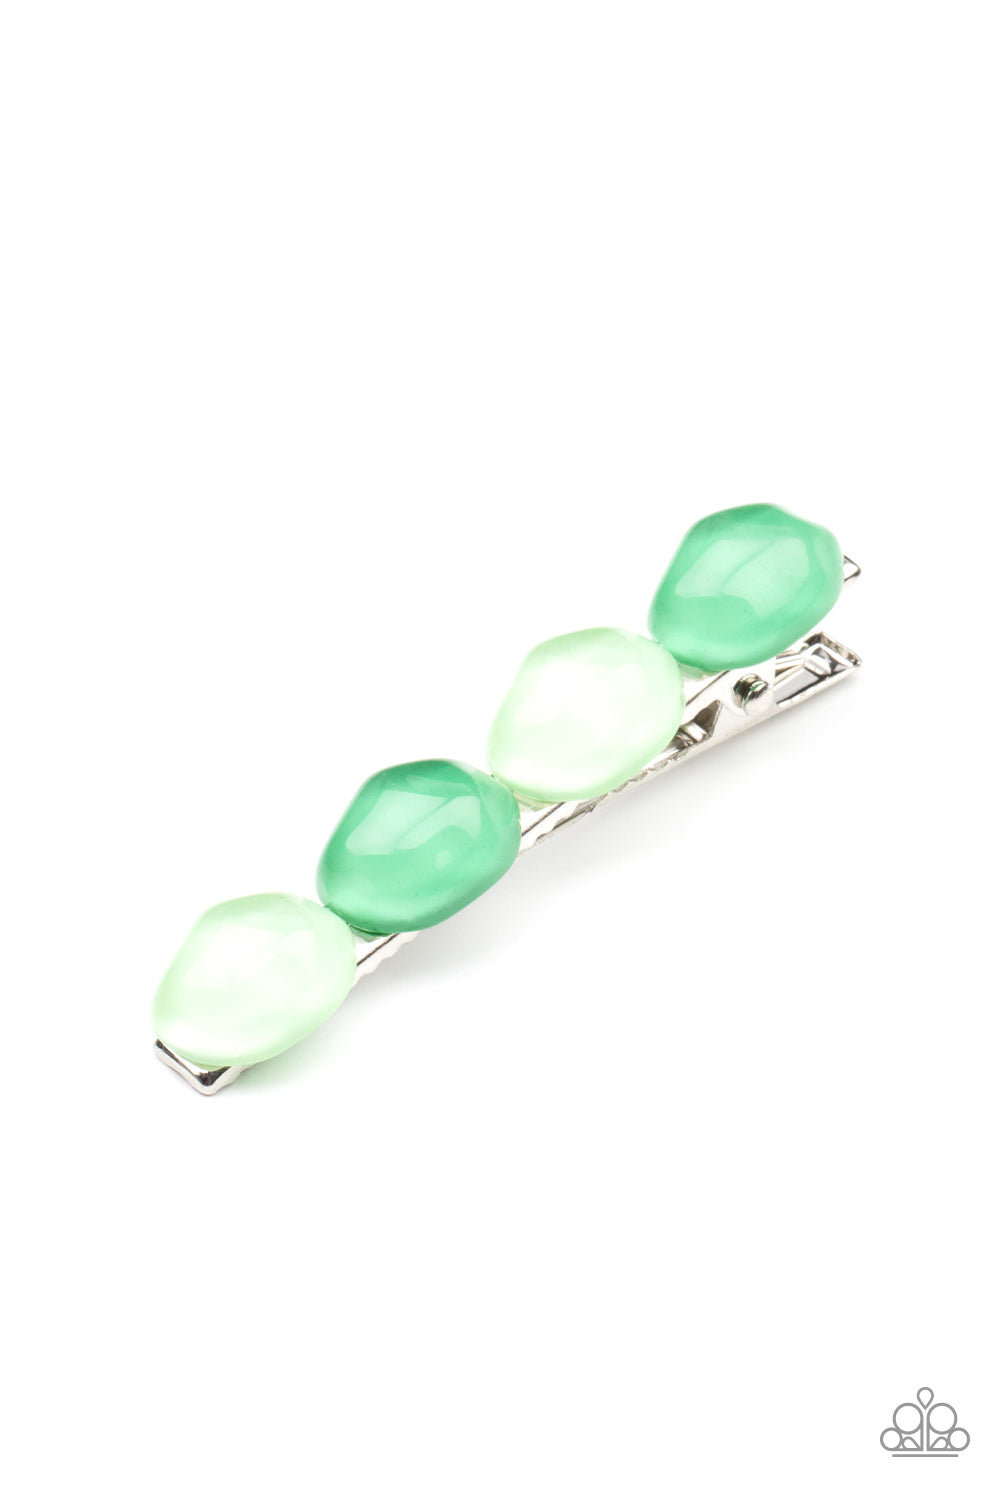 Bubbly Reflections__Hair Accessories__Green